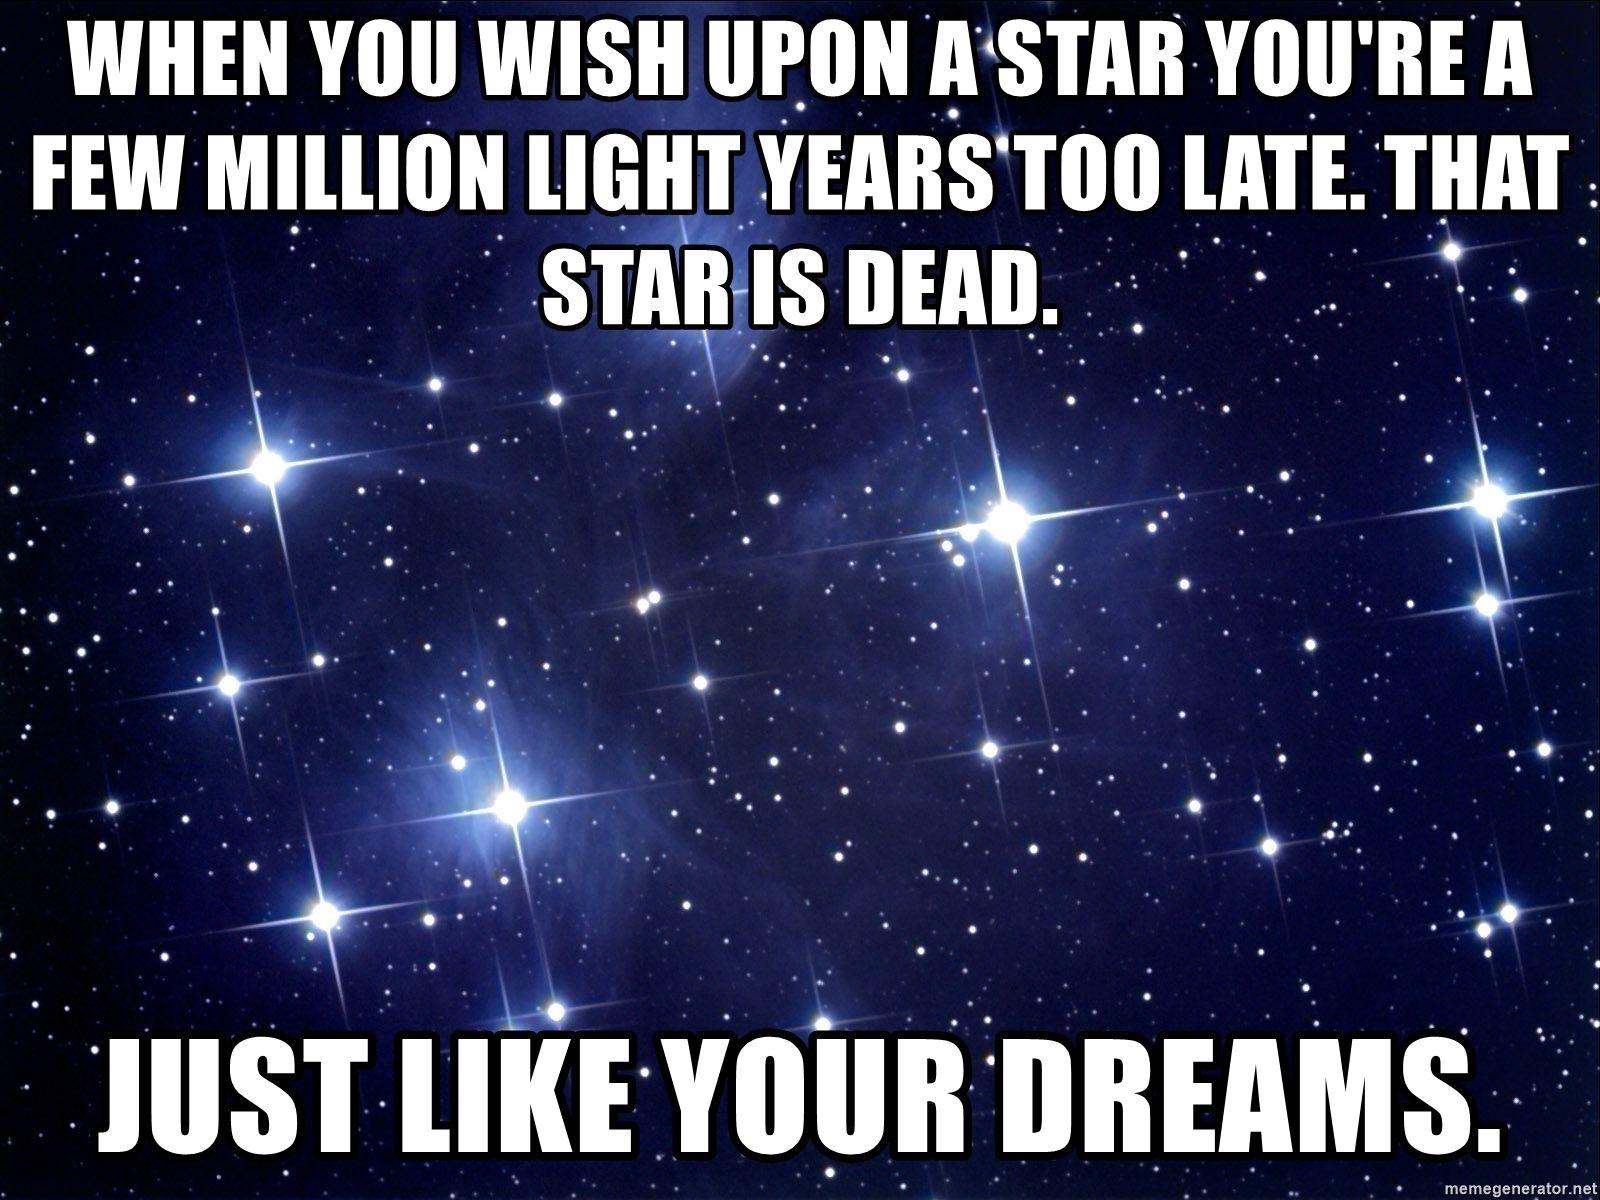 When you wish upon a star you're a few million light years too late